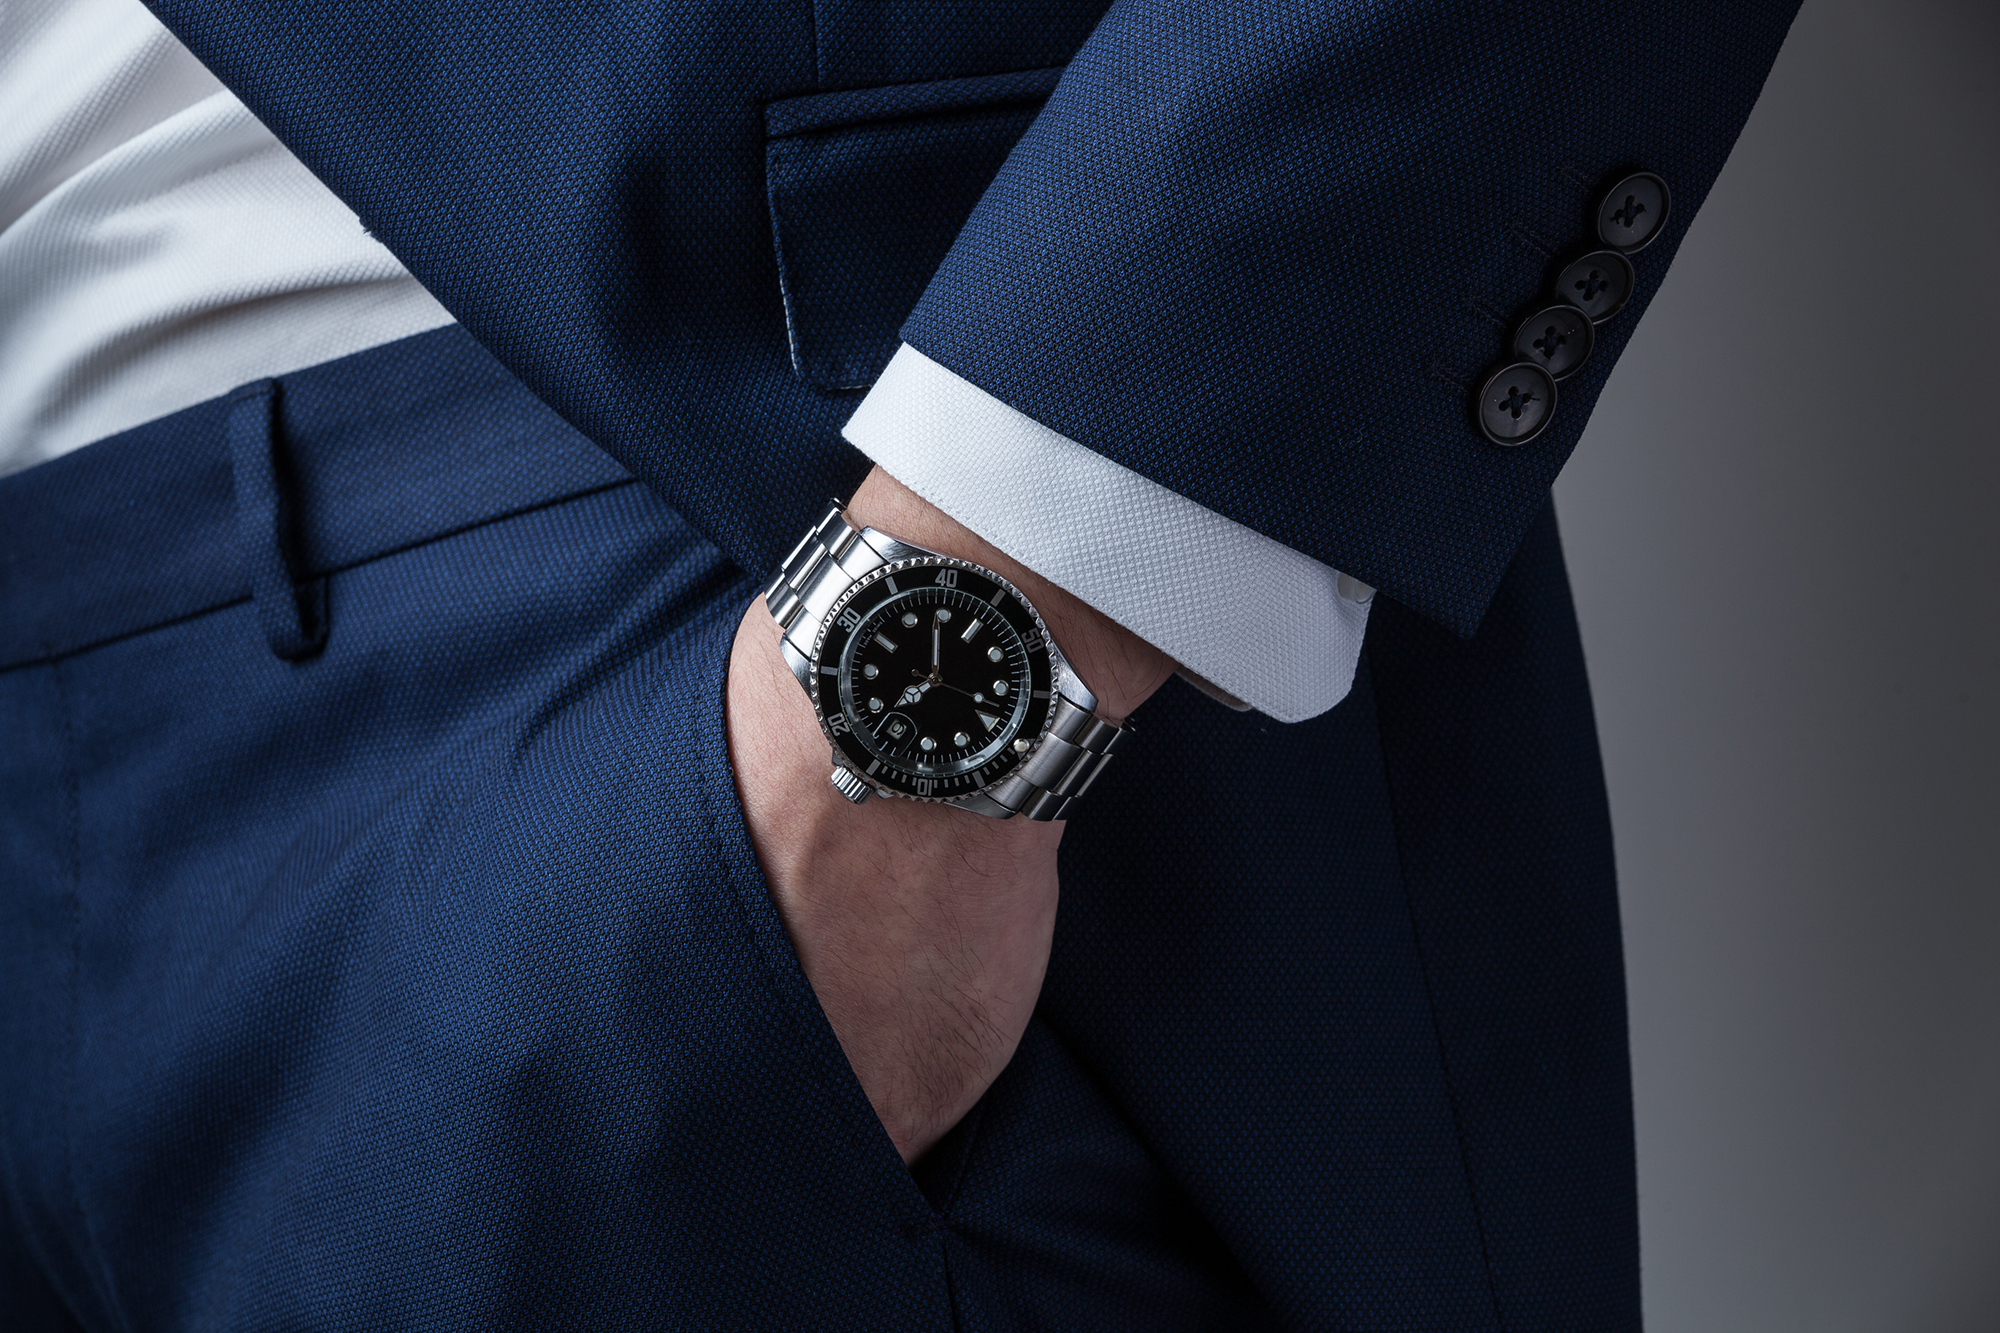 Diving watch and suit